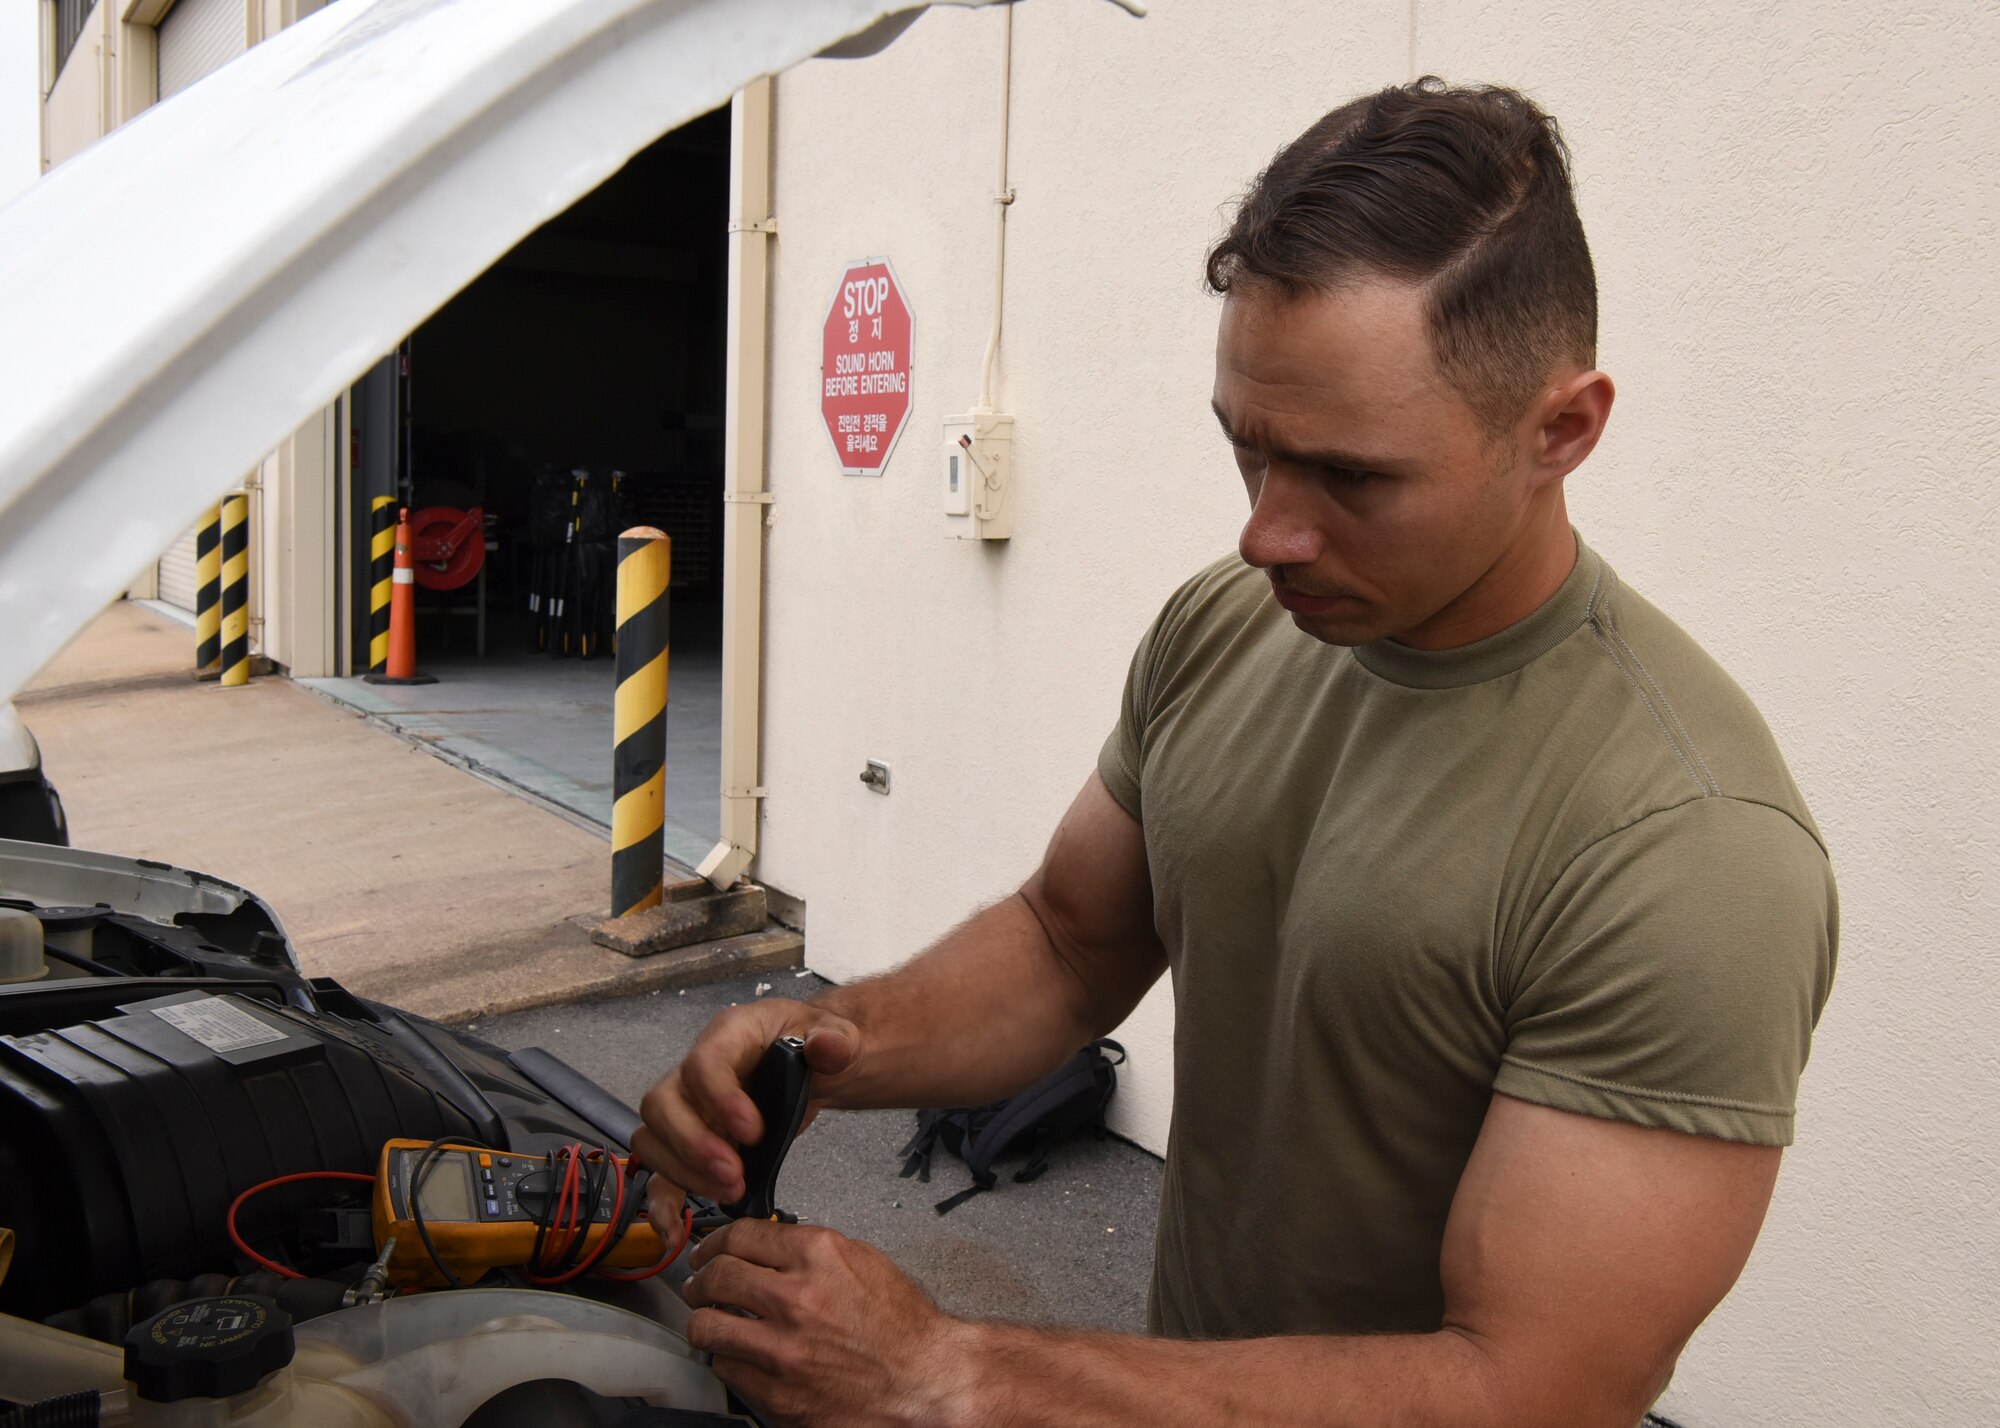 Tech. Sgt. John Bishop, 8th Logistics Readiness Squadron NCO in charge of vehicle maintenance, inspects a vehicle at Kunsan Air Base, Republic of Korea, June 4, 2020. The unit helps maintain 485 vehicles across the Wolf Pack. (U.S. Air Force photo by Staff Sgt. Anthony Hetlage)